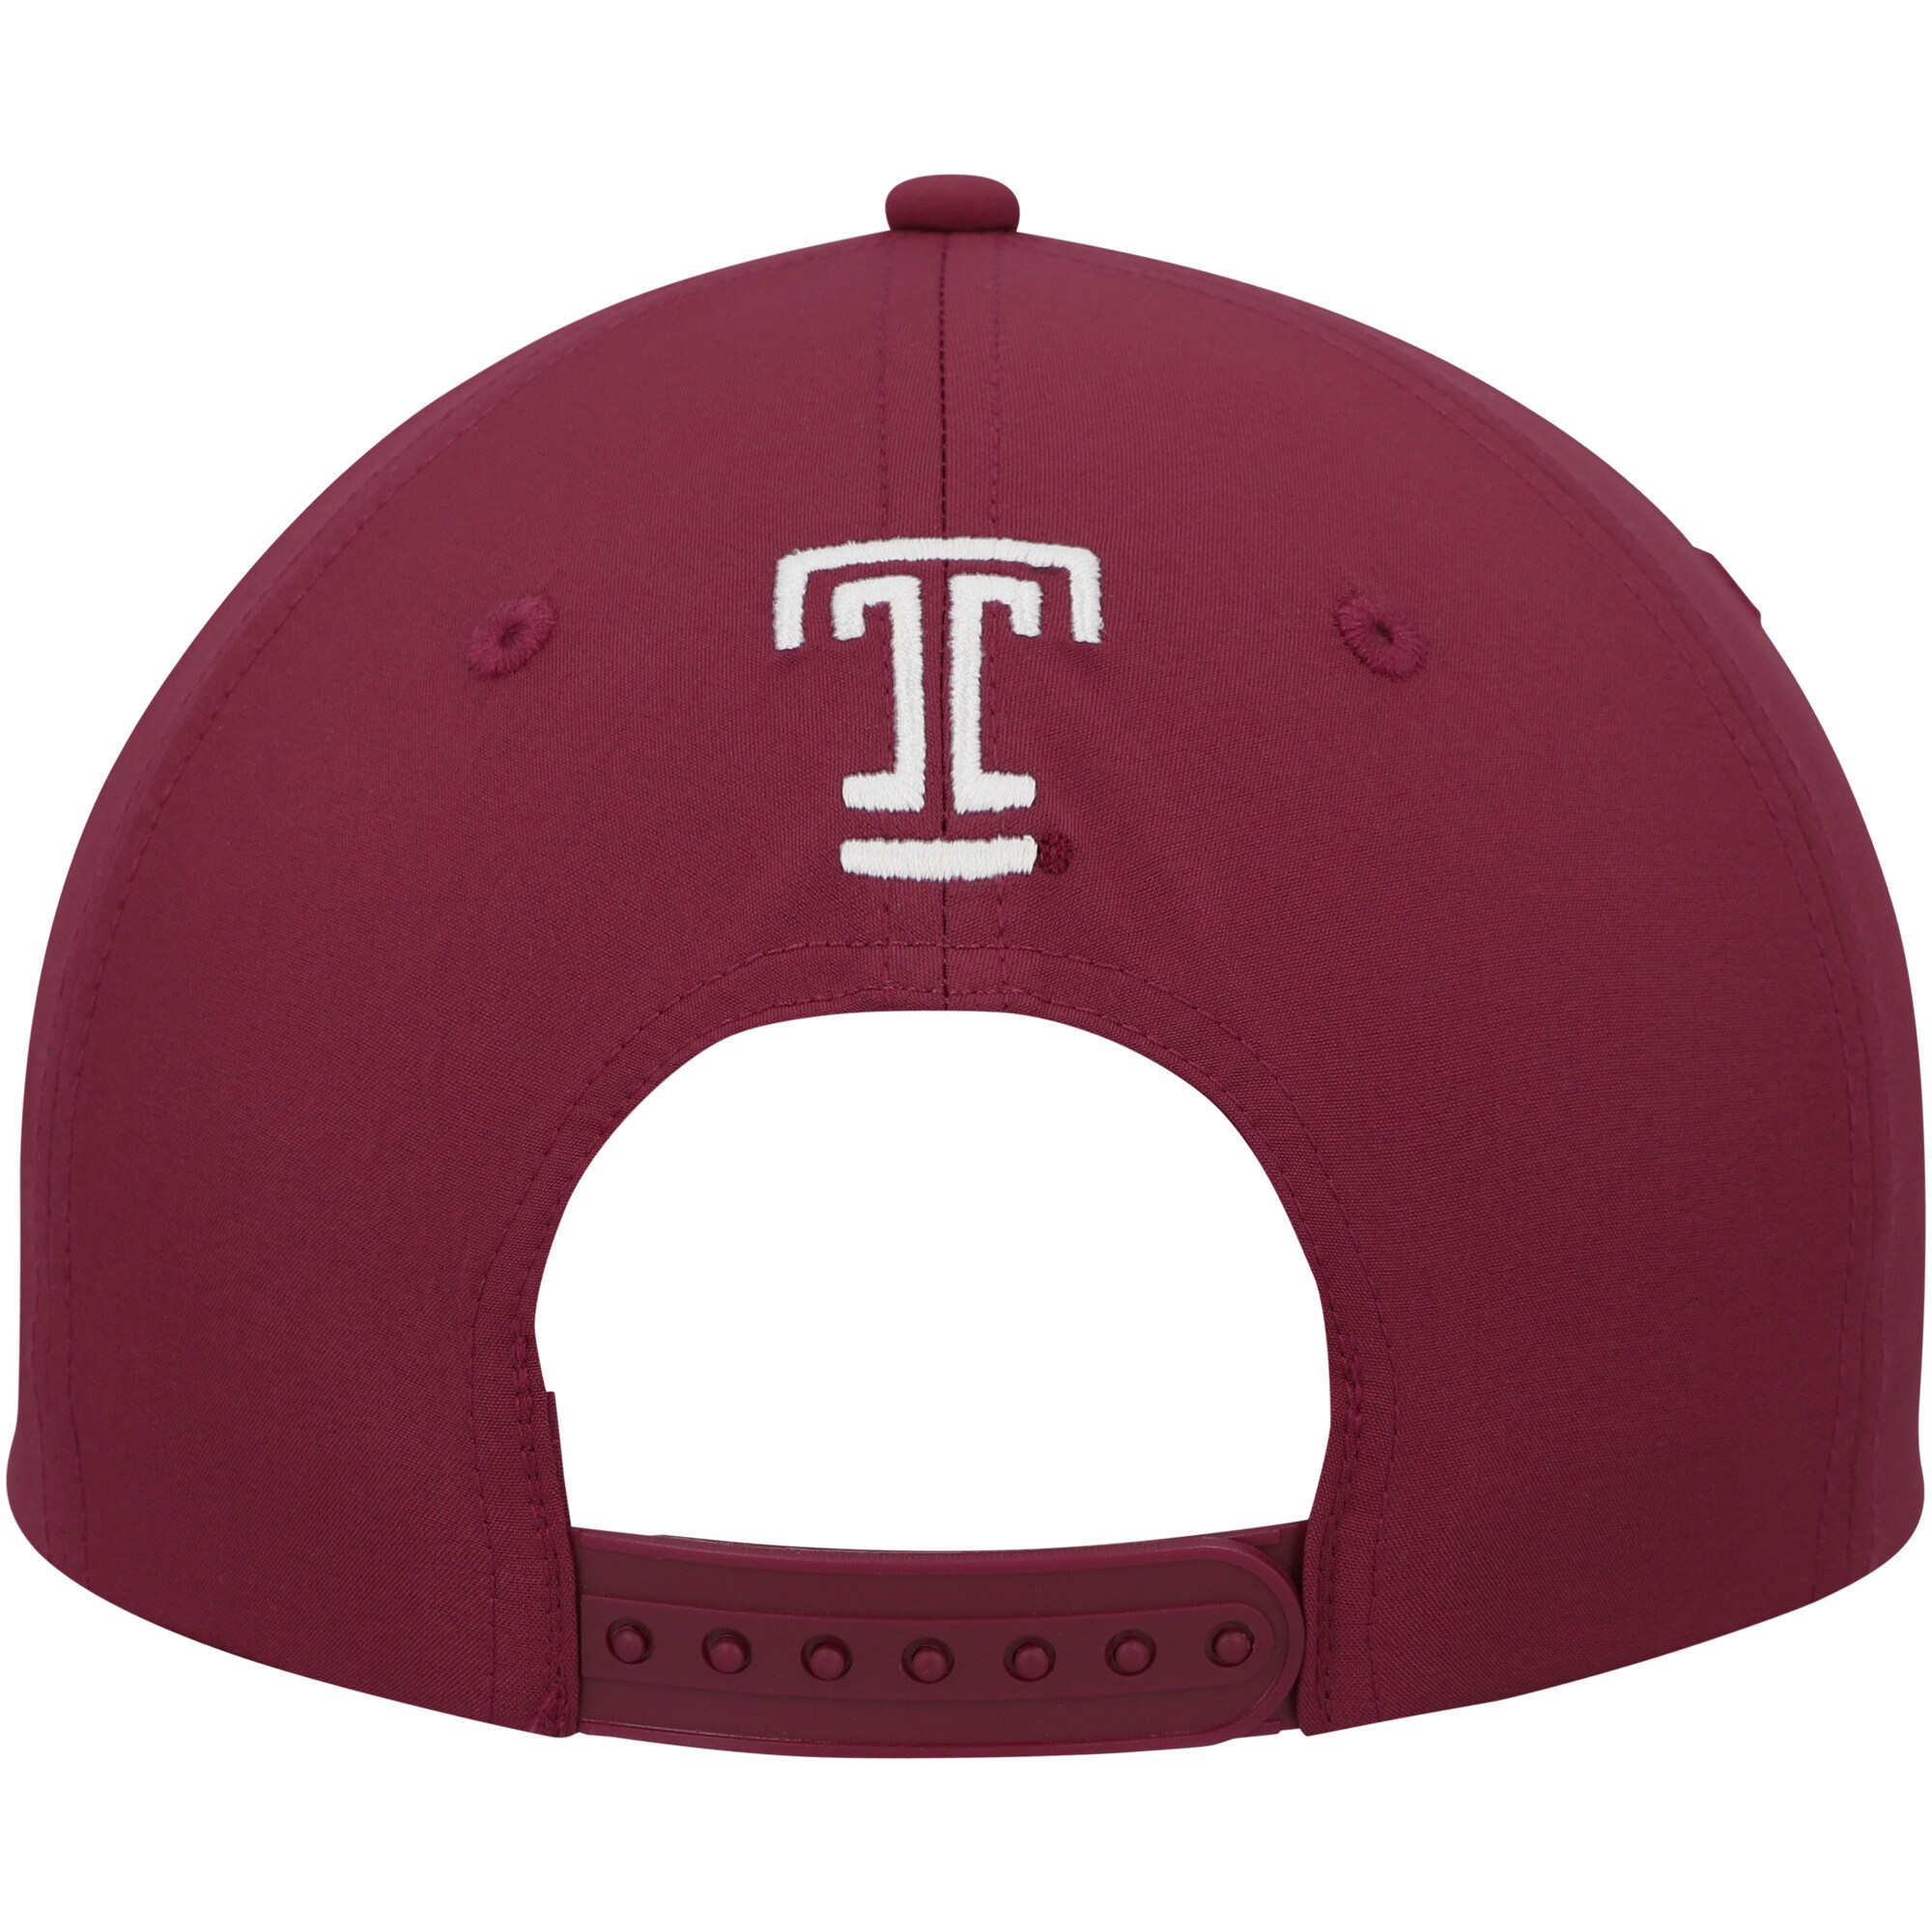 Men's Colosseum Cherry Temple Owls Positraction Snapback Hat - OSFA - image 4 of 4